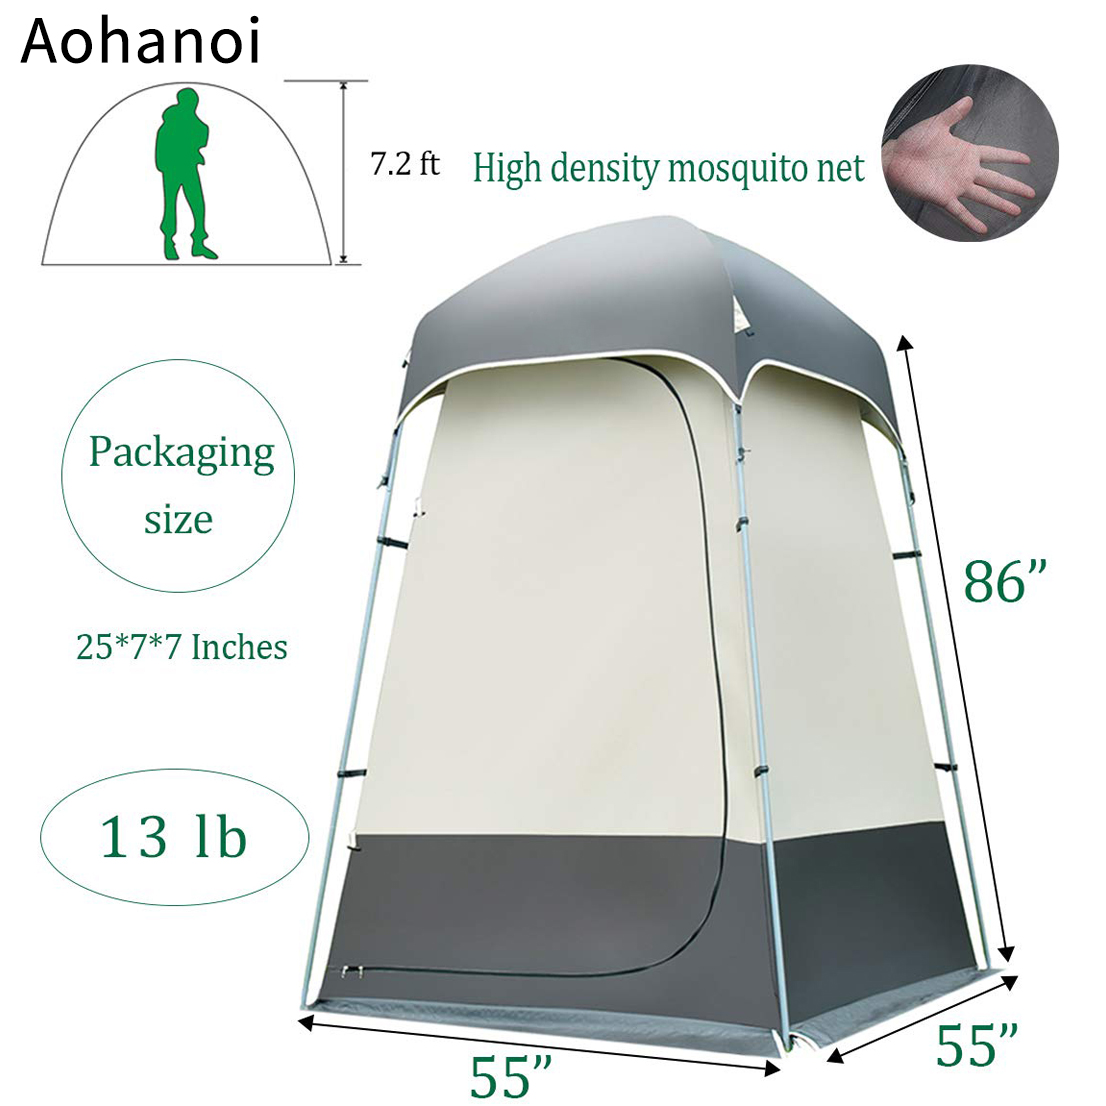 Aohanoi Outdoor Shower Tent Changing Room Privacy Portable Camping Shelters - image 5 of 6